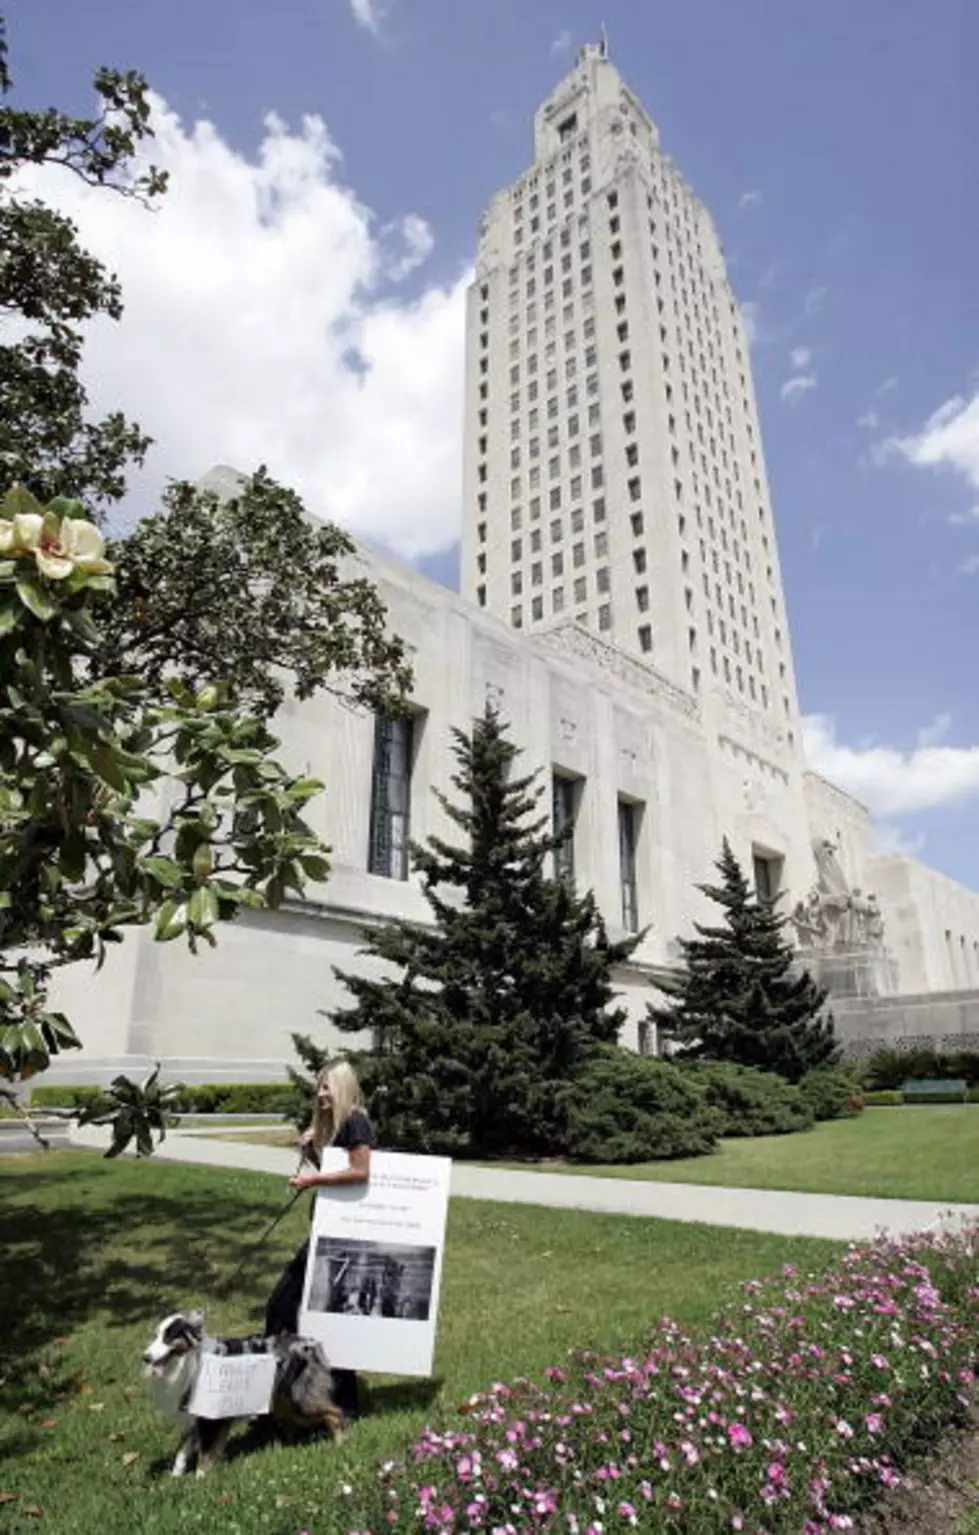 Some Louisiana Lawmakers Not Returning To Baton Rouge